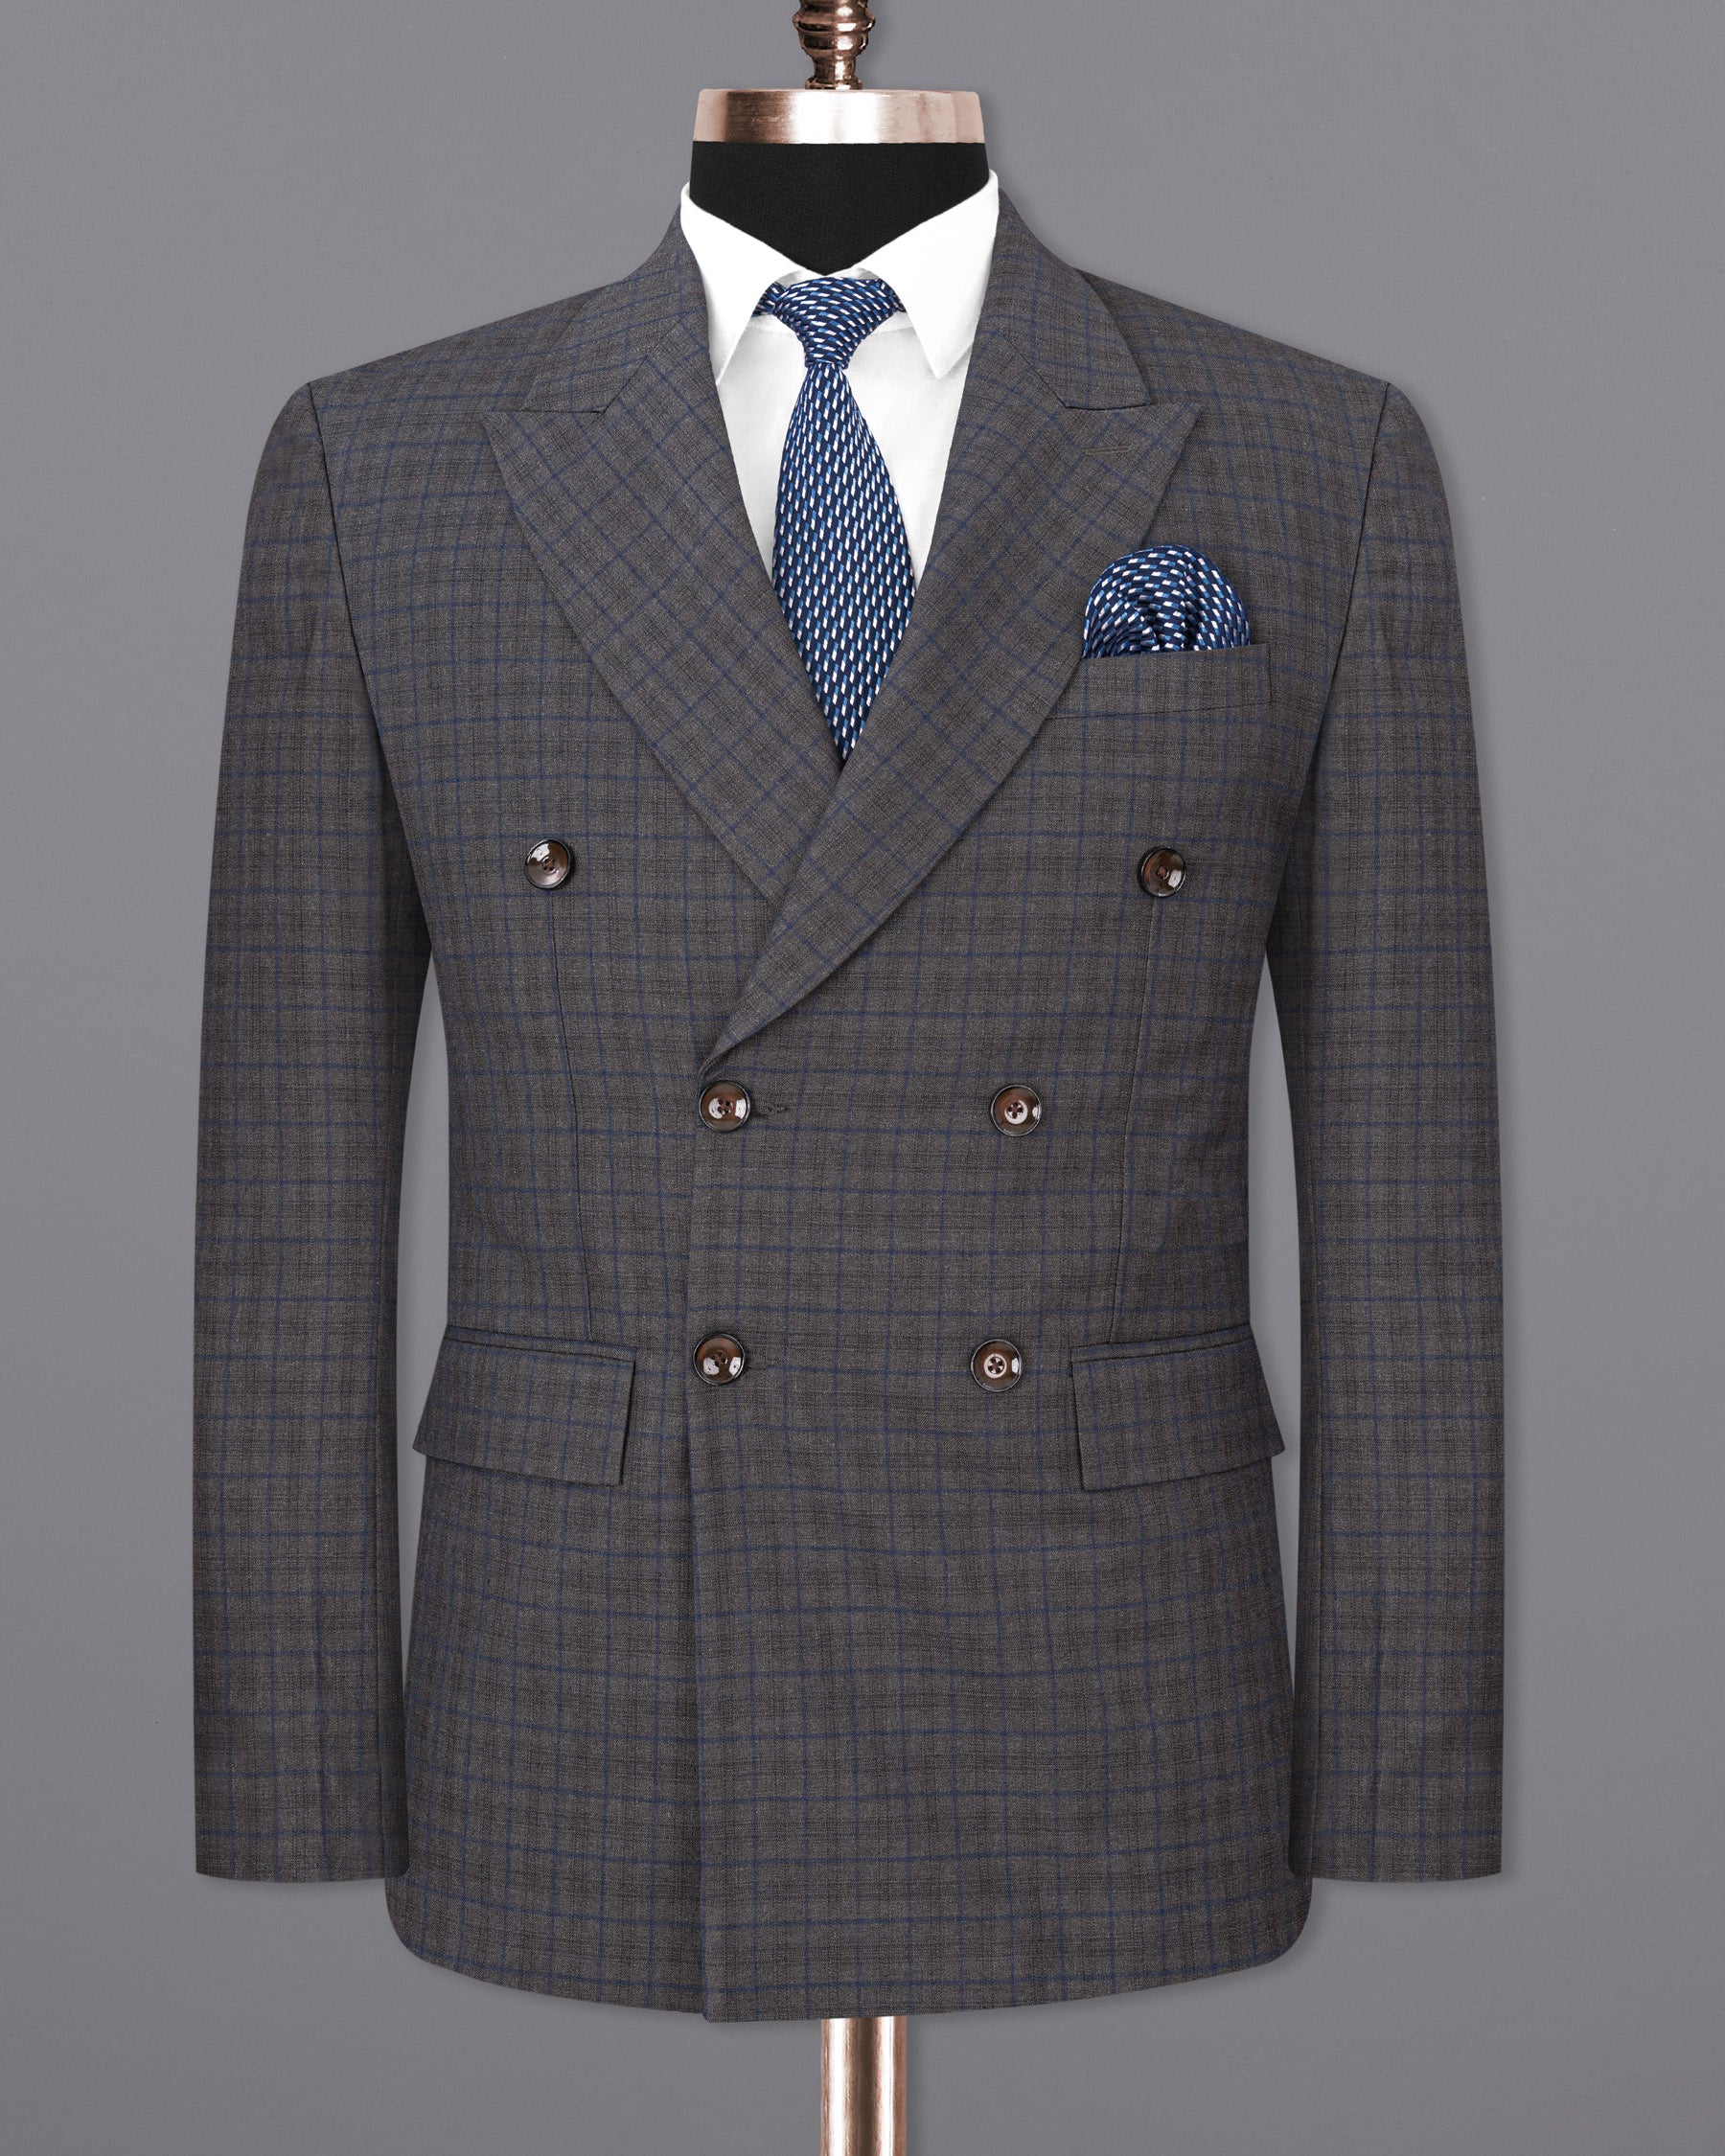 Tundora Gray Plaid Double Breasted Suit ST1724-DB-36, ST1724-DB-38, ST1724-DB-40, ST1724-DB-42, ST1724-DB-44, ST1724-DB-46, ST1724-DB-48, ST1724-DB-50, ST1724-DB-52, ST1724-DB-54, ST1724-DB-56, ST1724-DB-58, ST1724-DB-60